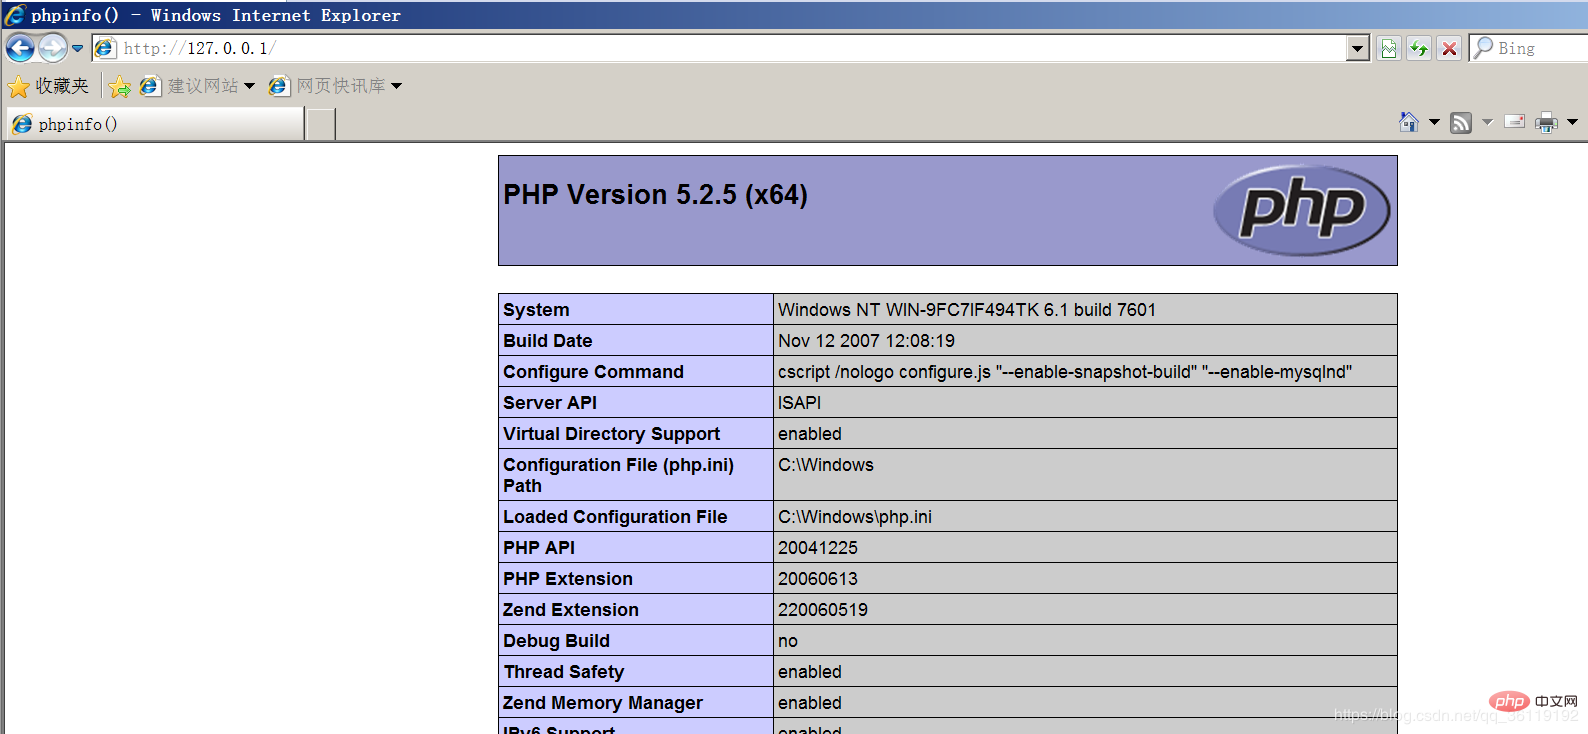 Does iis support php?